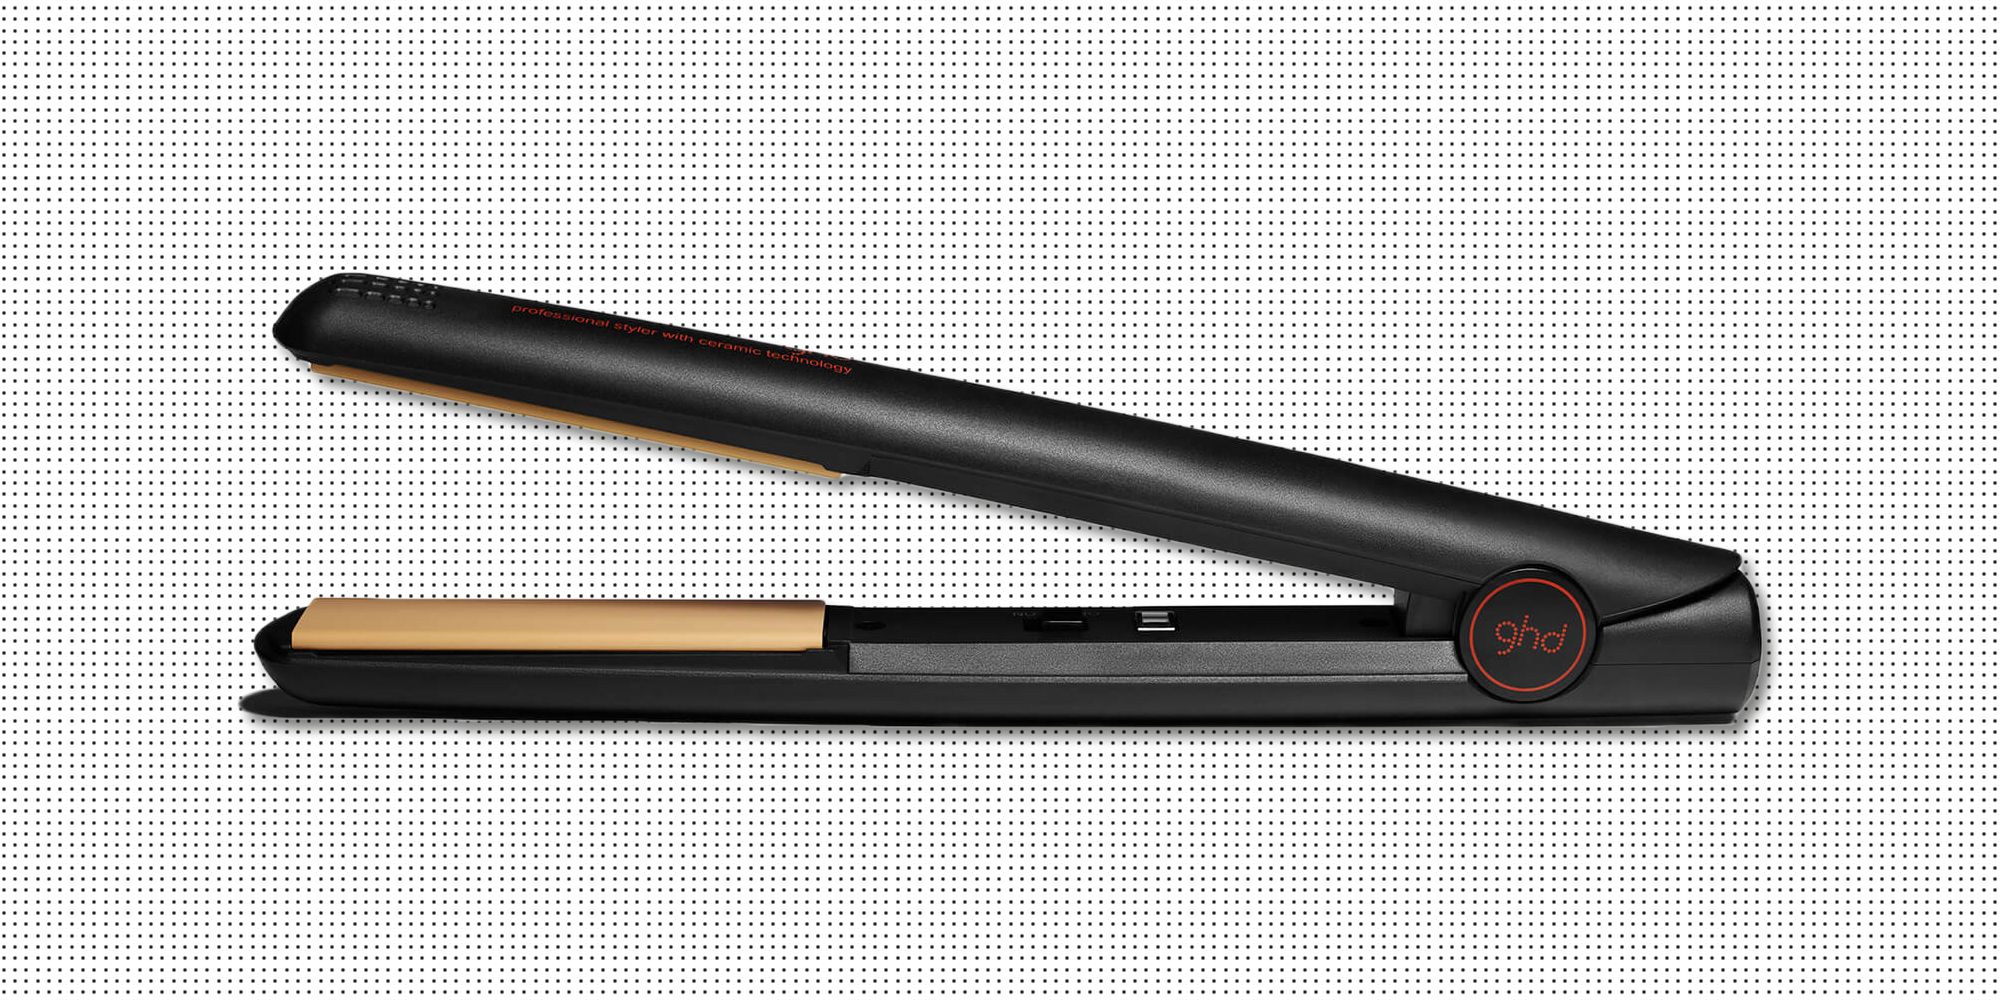 Ghd Black Friday 2020 Save On Straighteners Hairdryers And Tools